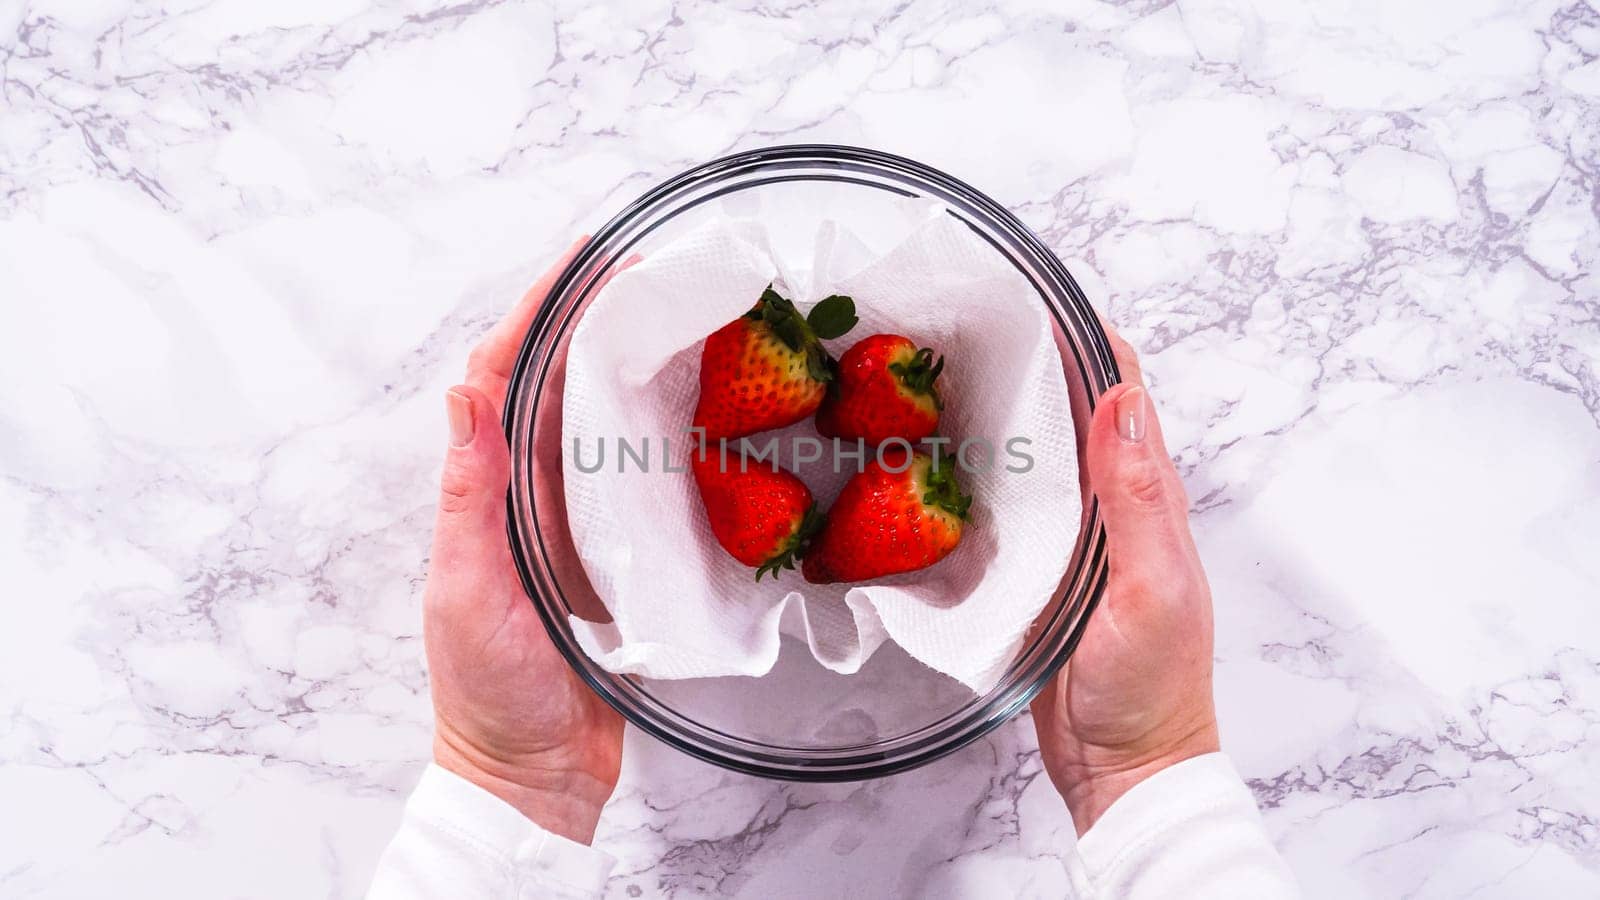 Flat lay. Strawberries, freshly washed and dried, are neatly stored in a glass bowl lined with a paper towel and securely covered with plastic wrap to maintain freshness.